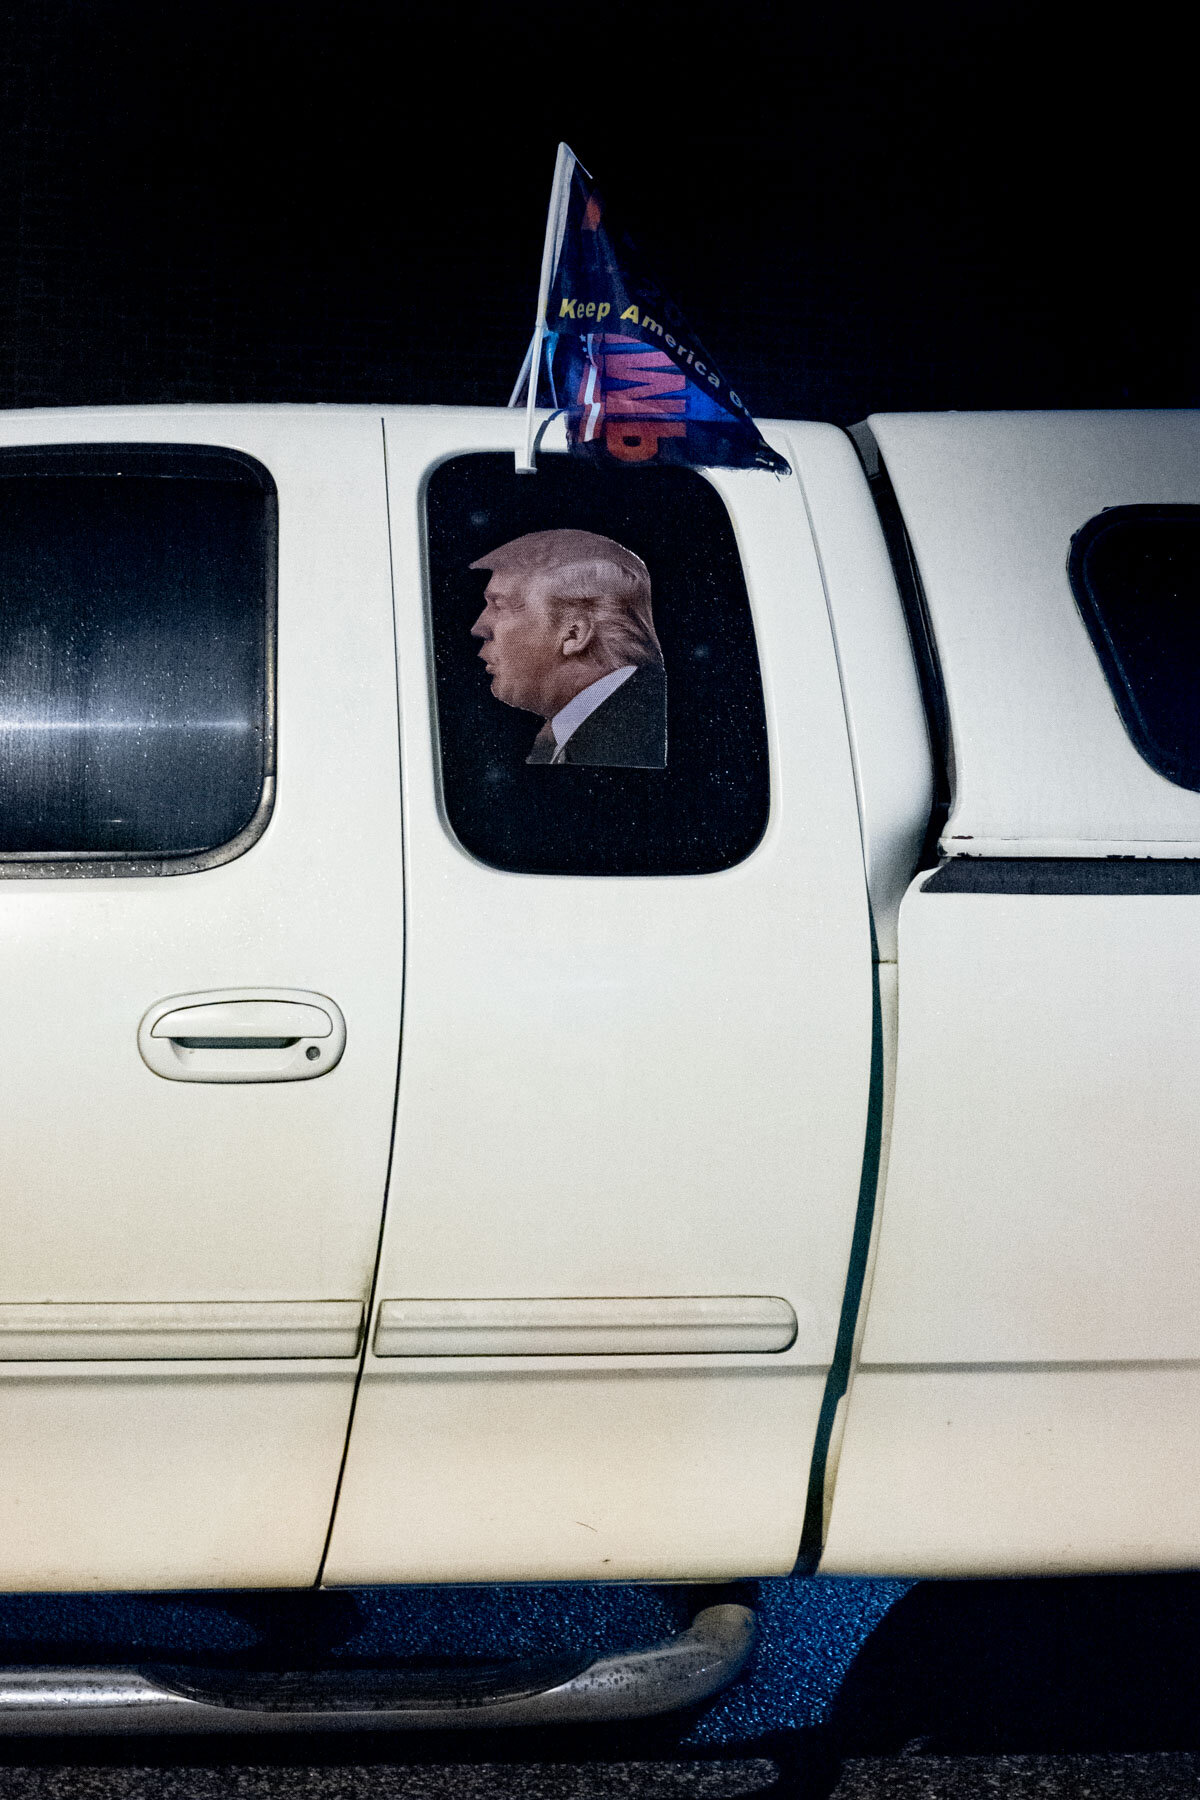  November 12th 2020 - A car presenting a Trump sticker and flag is parked during a #Stopthesteal Caravan rally in Raleigh. 